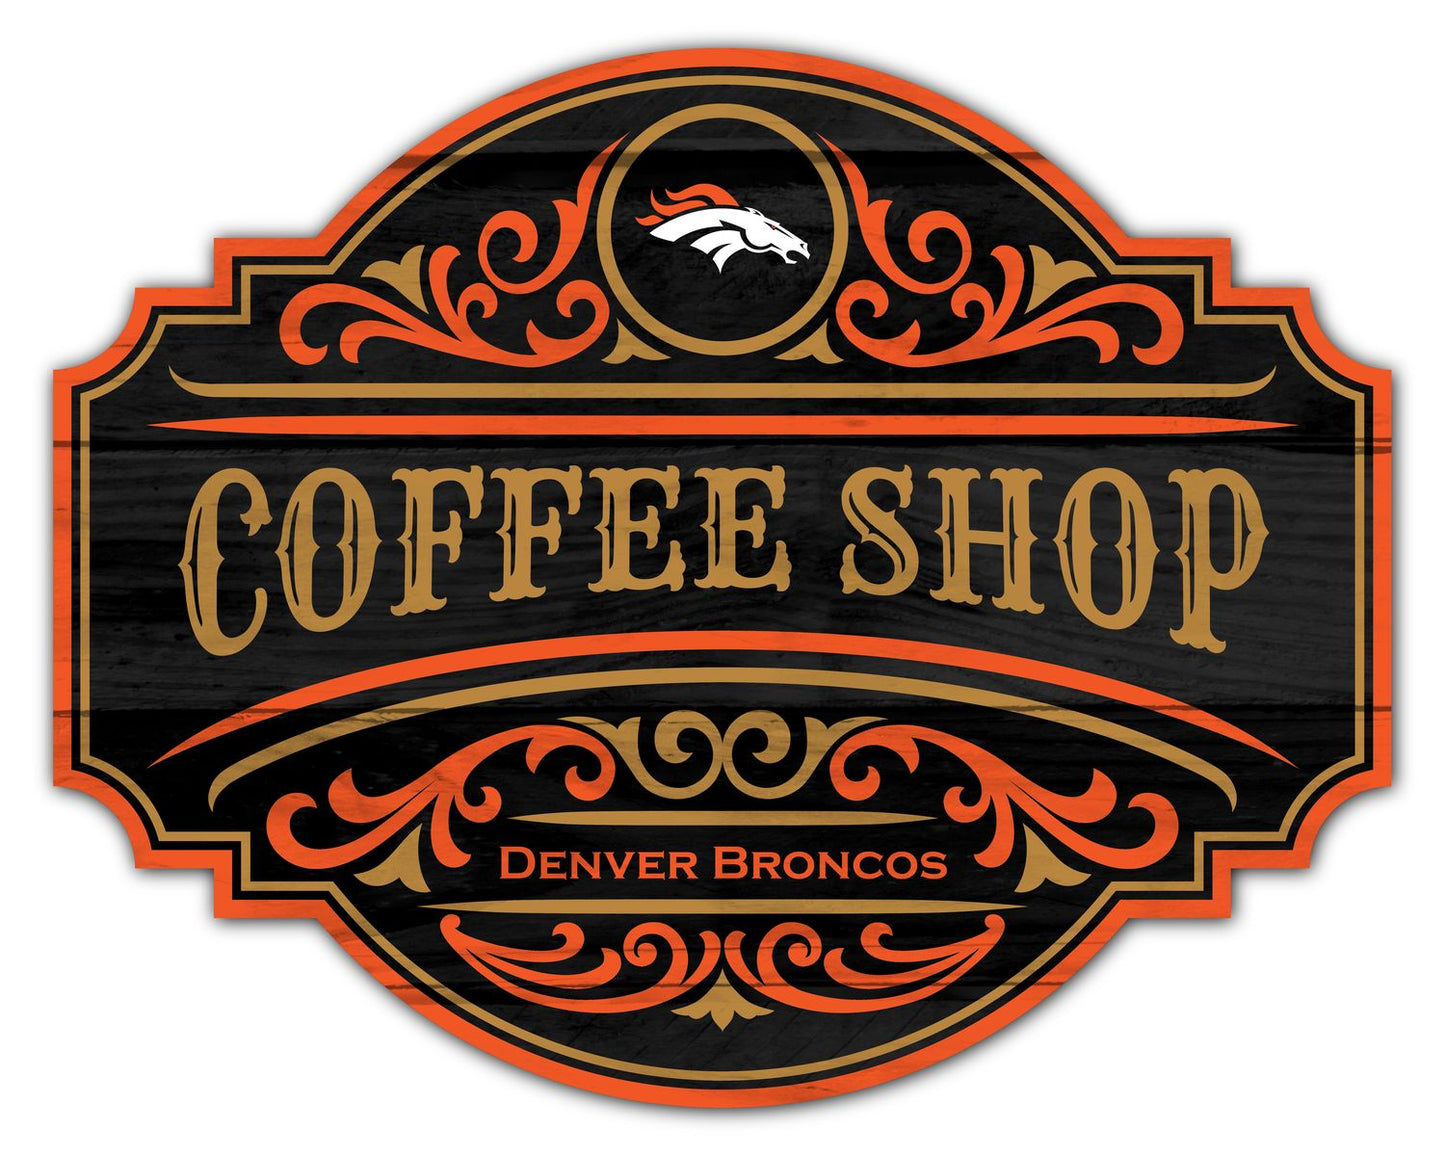 Denver Broncos Coffee Tavern Sign by Fan Creations